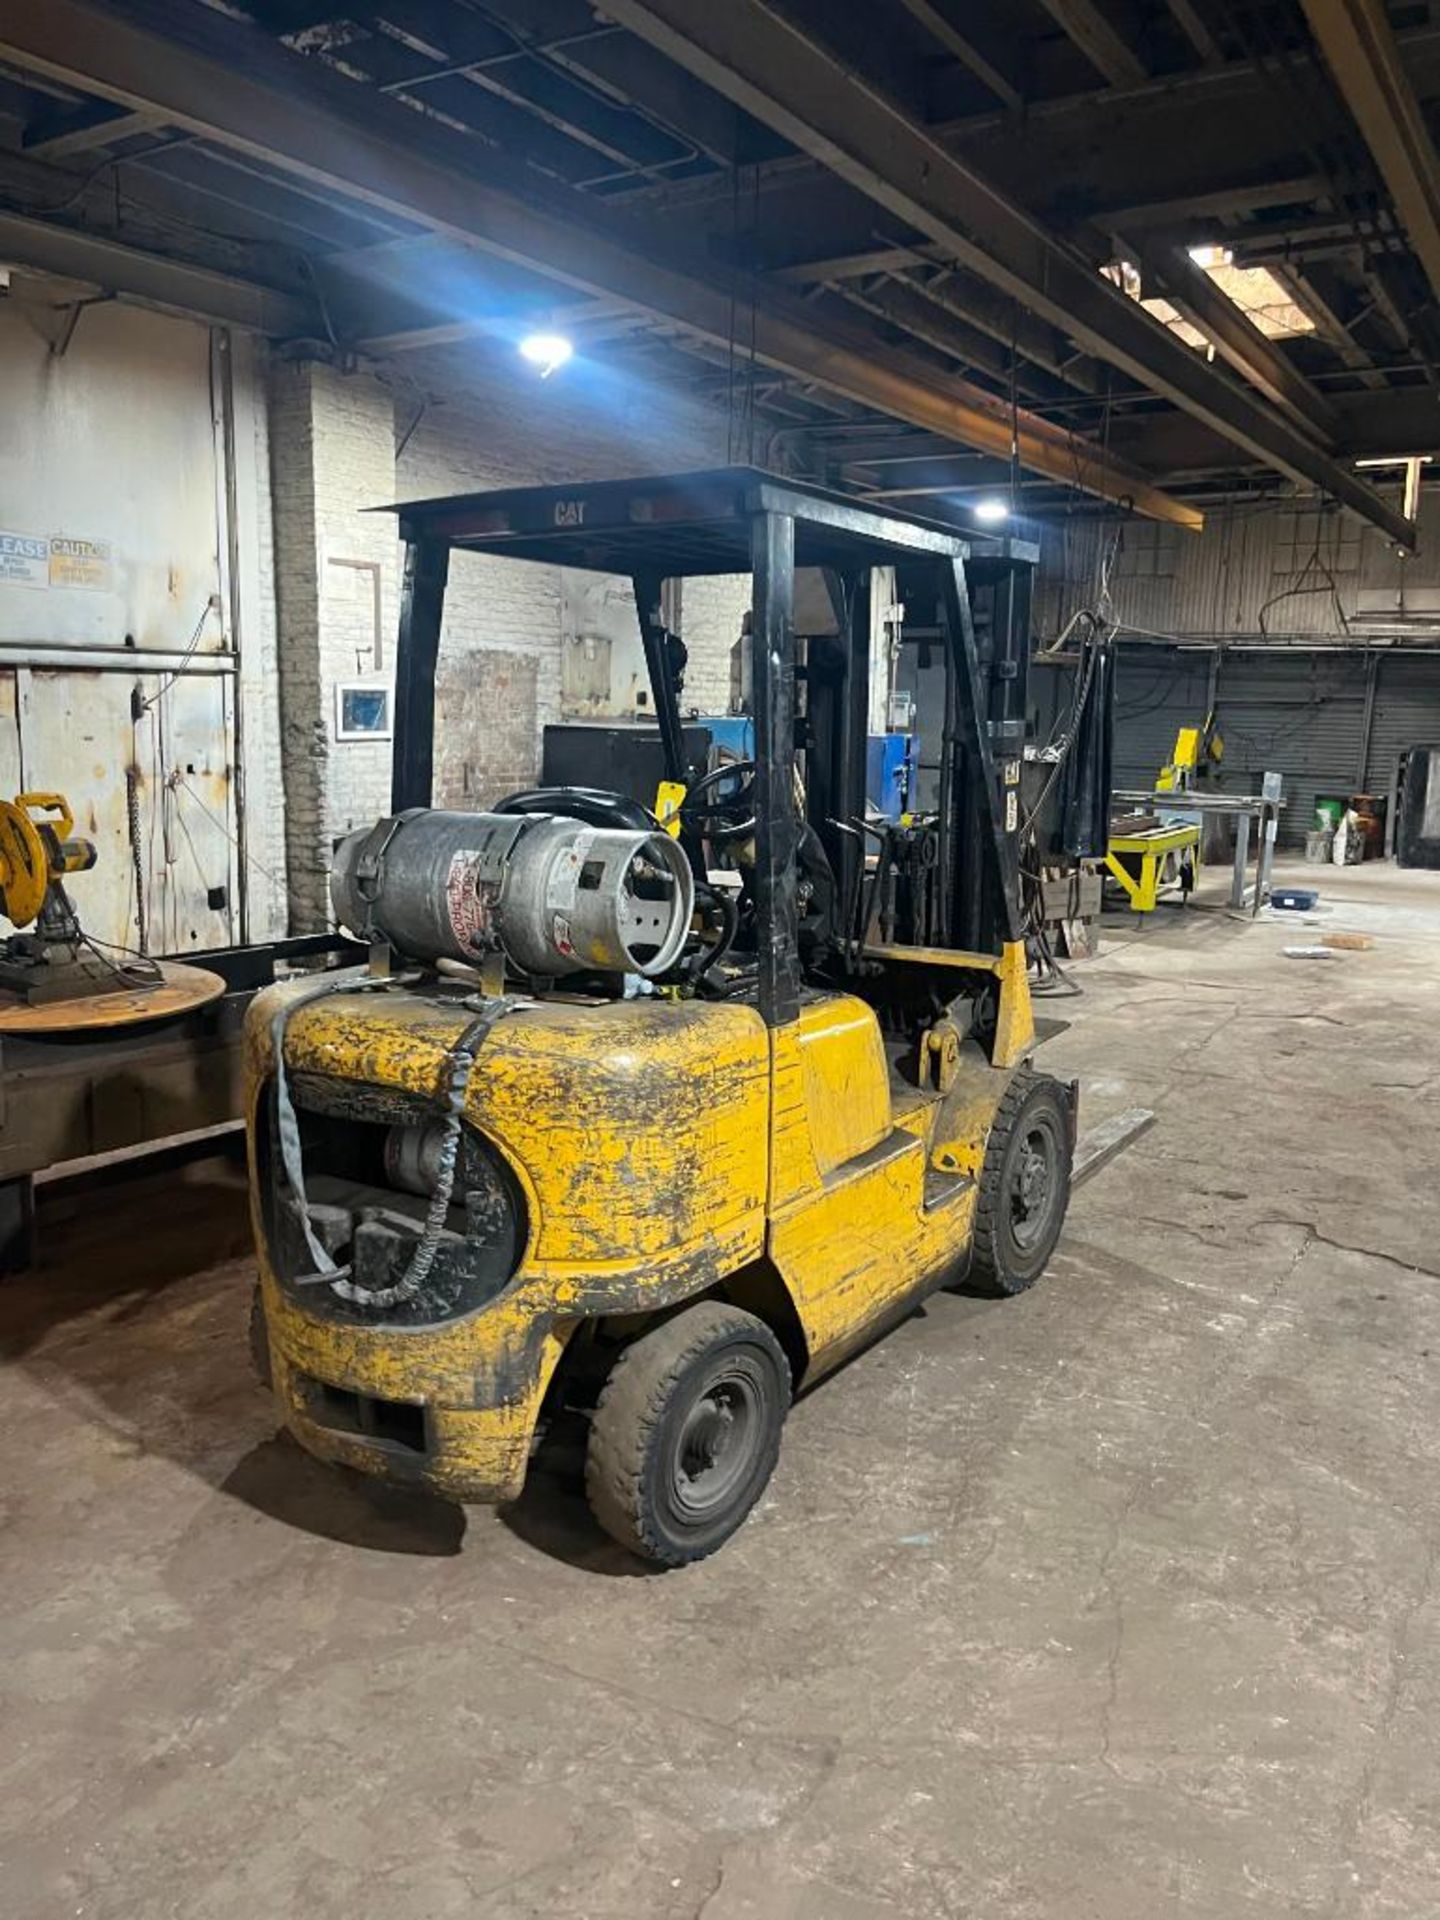 Caterpillar forklift, lp/gasoline powered, 12,436 hrs., model gp25k, s/n at17b12977, solid tire, 3-s - Image 2 of 5